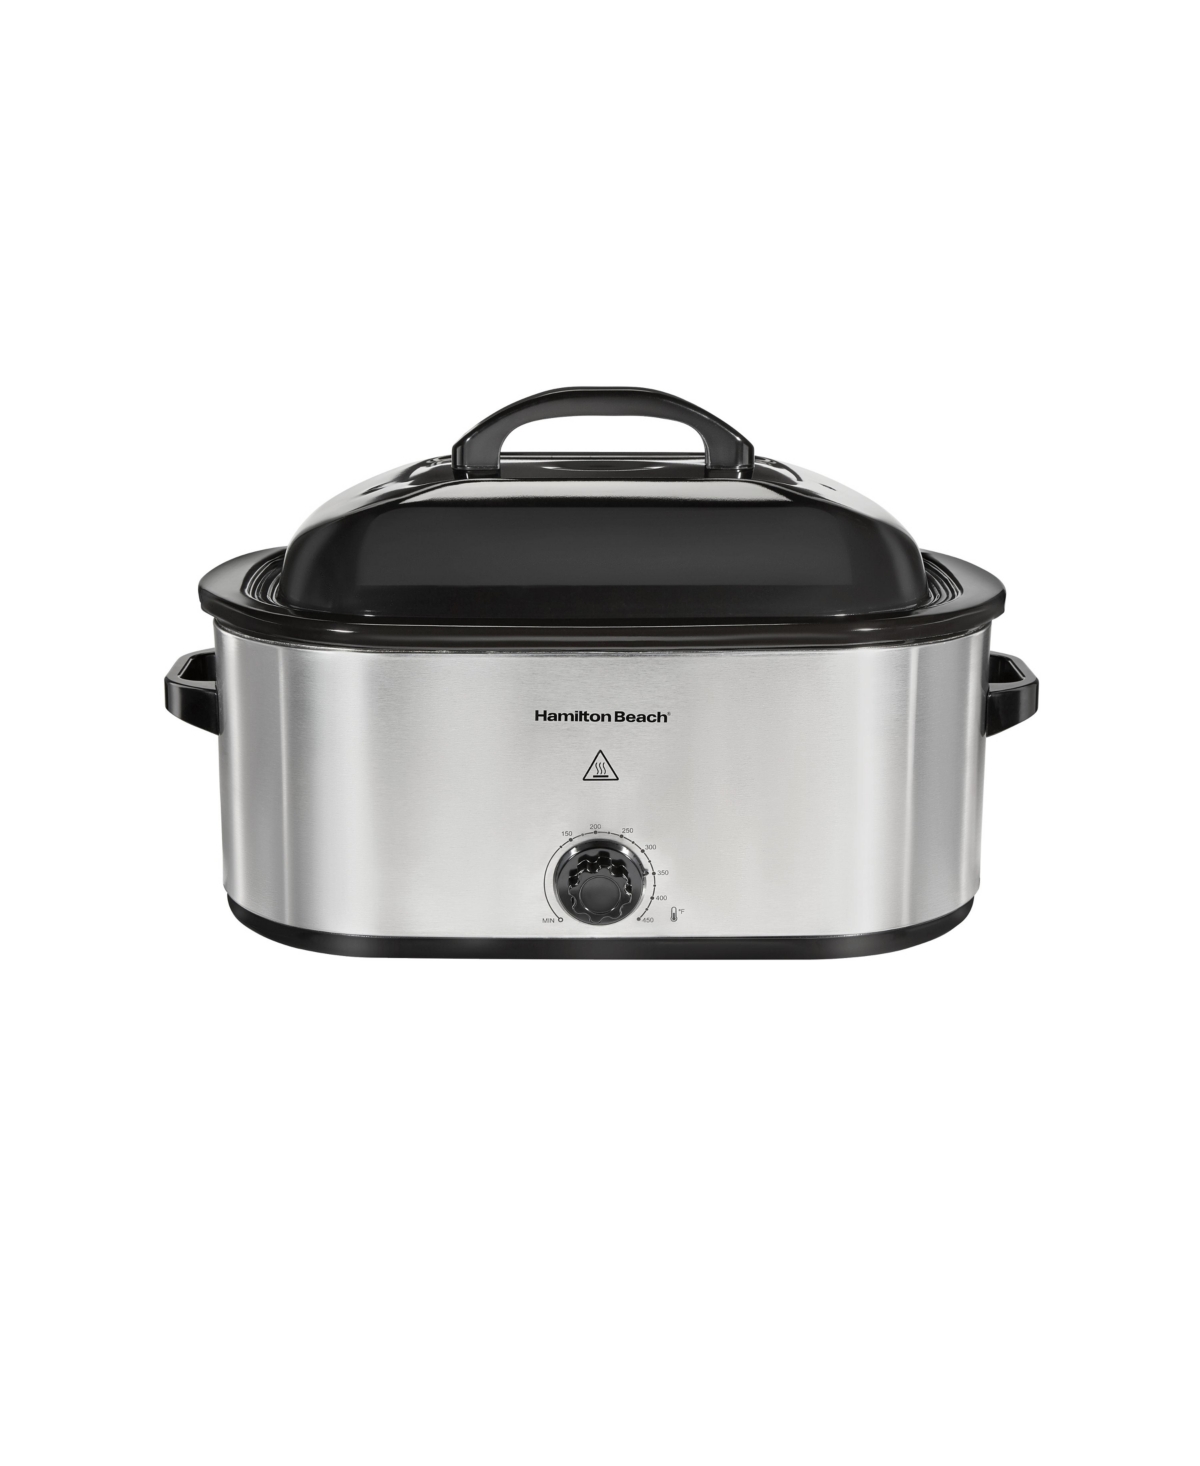 Hamilton Beach 22 Quart Electric Roaster Oven In Stainless Steel